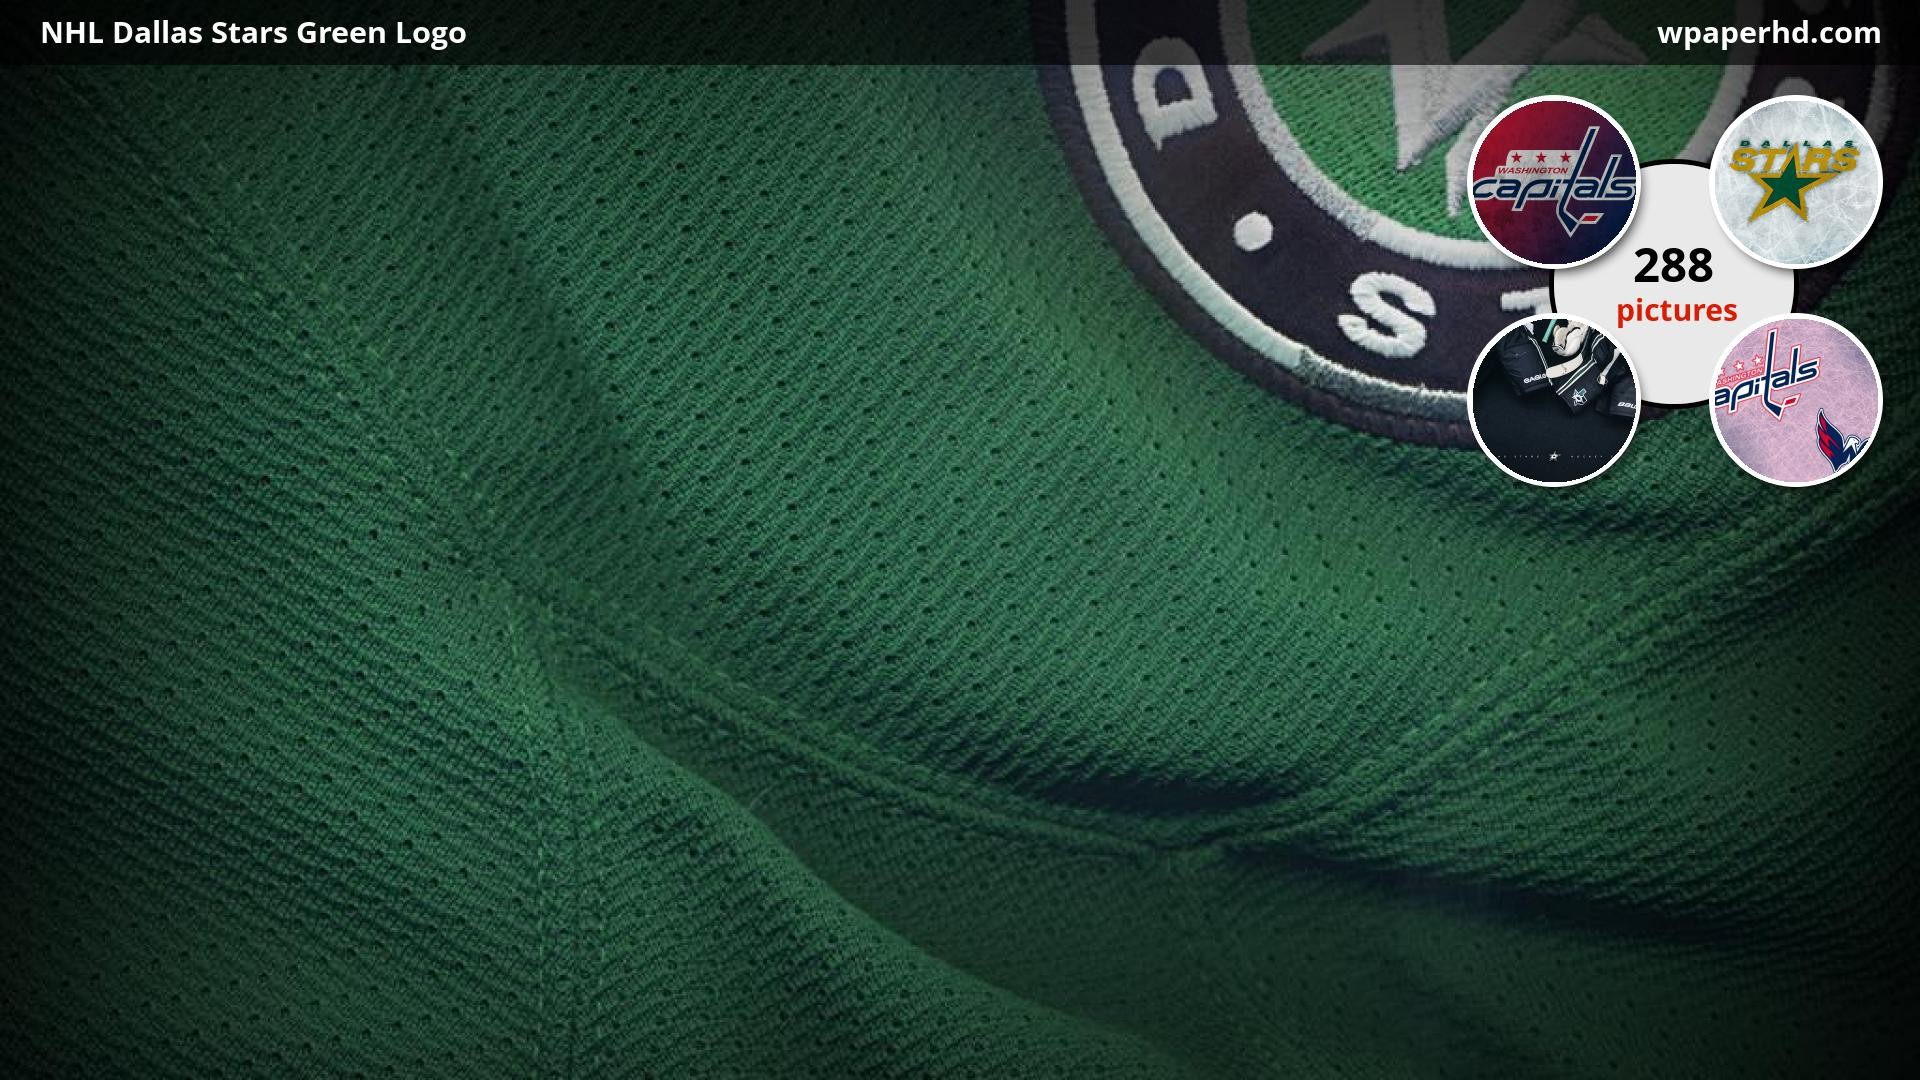 1920x1080 ... Dallas Stars Green Logo wallpaper, where you can download this picture  in Original size and ...